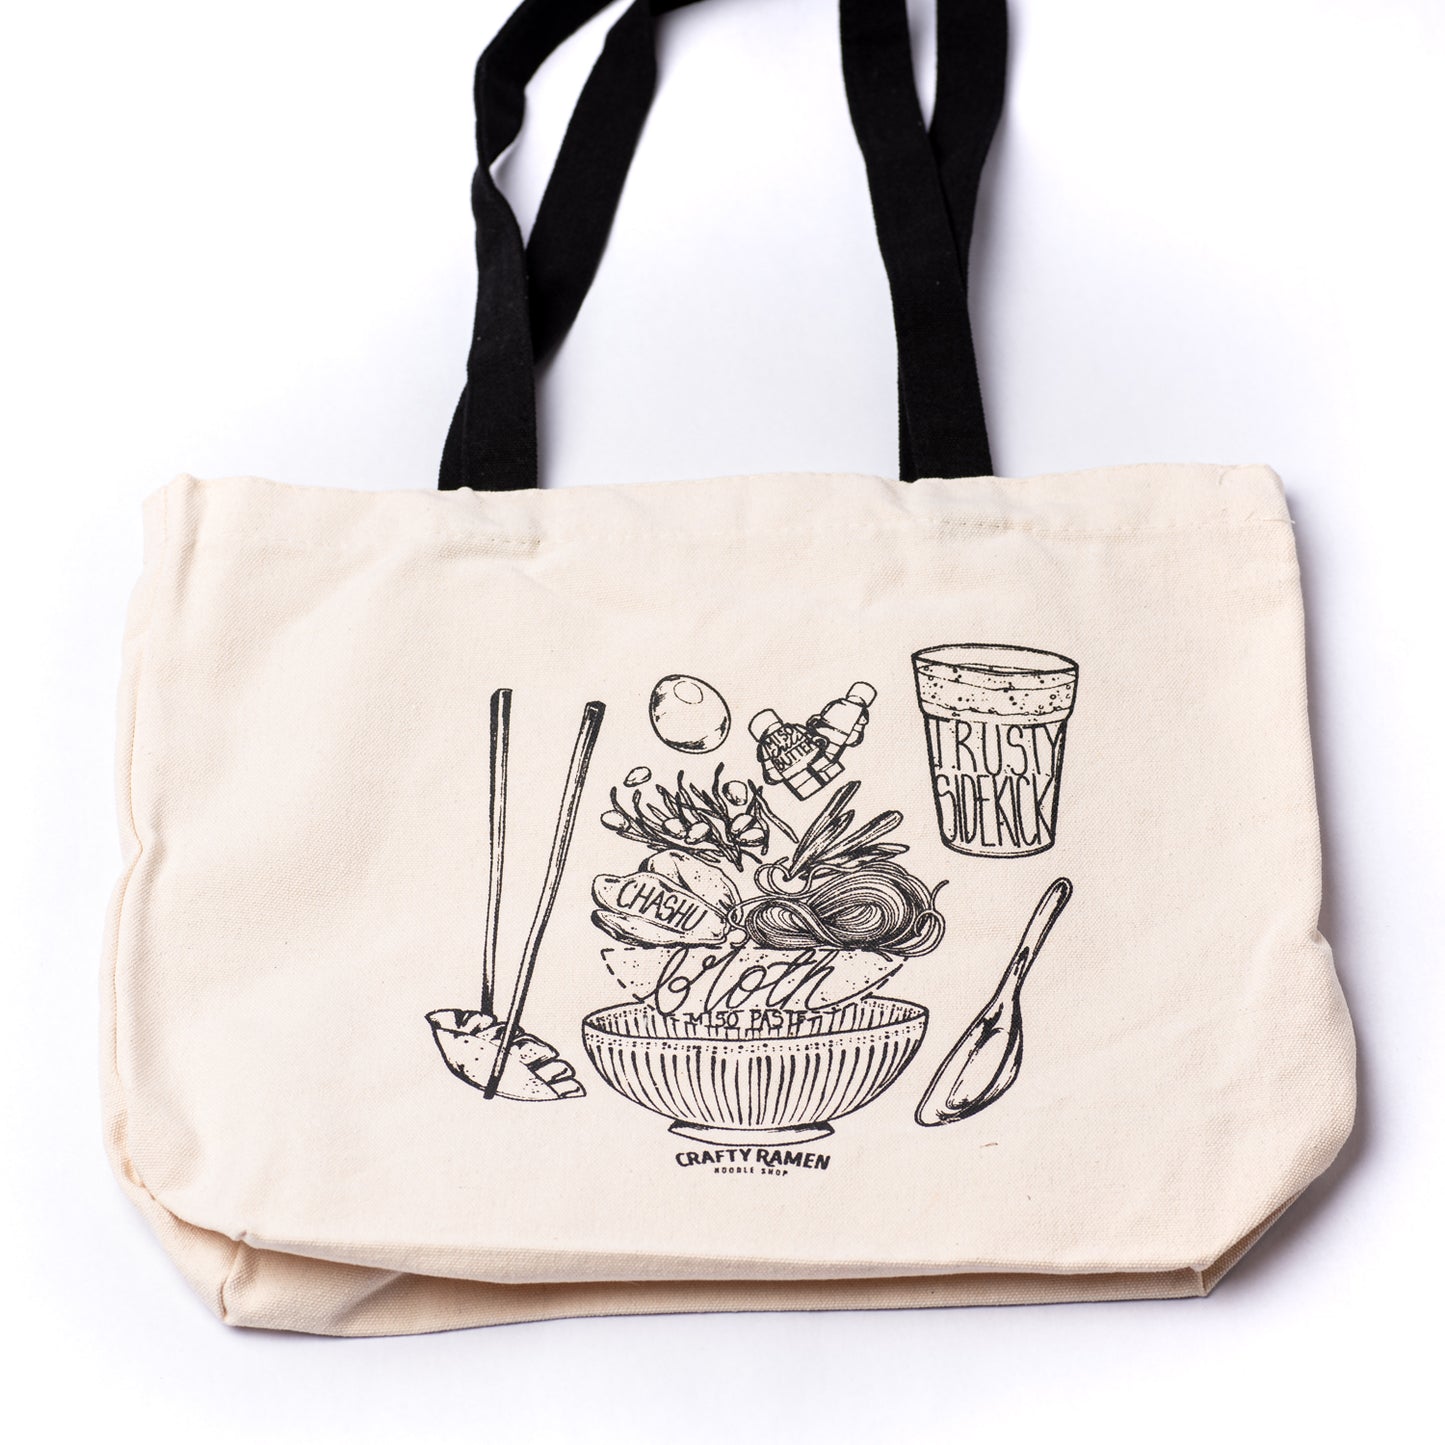 The Crafty Tote